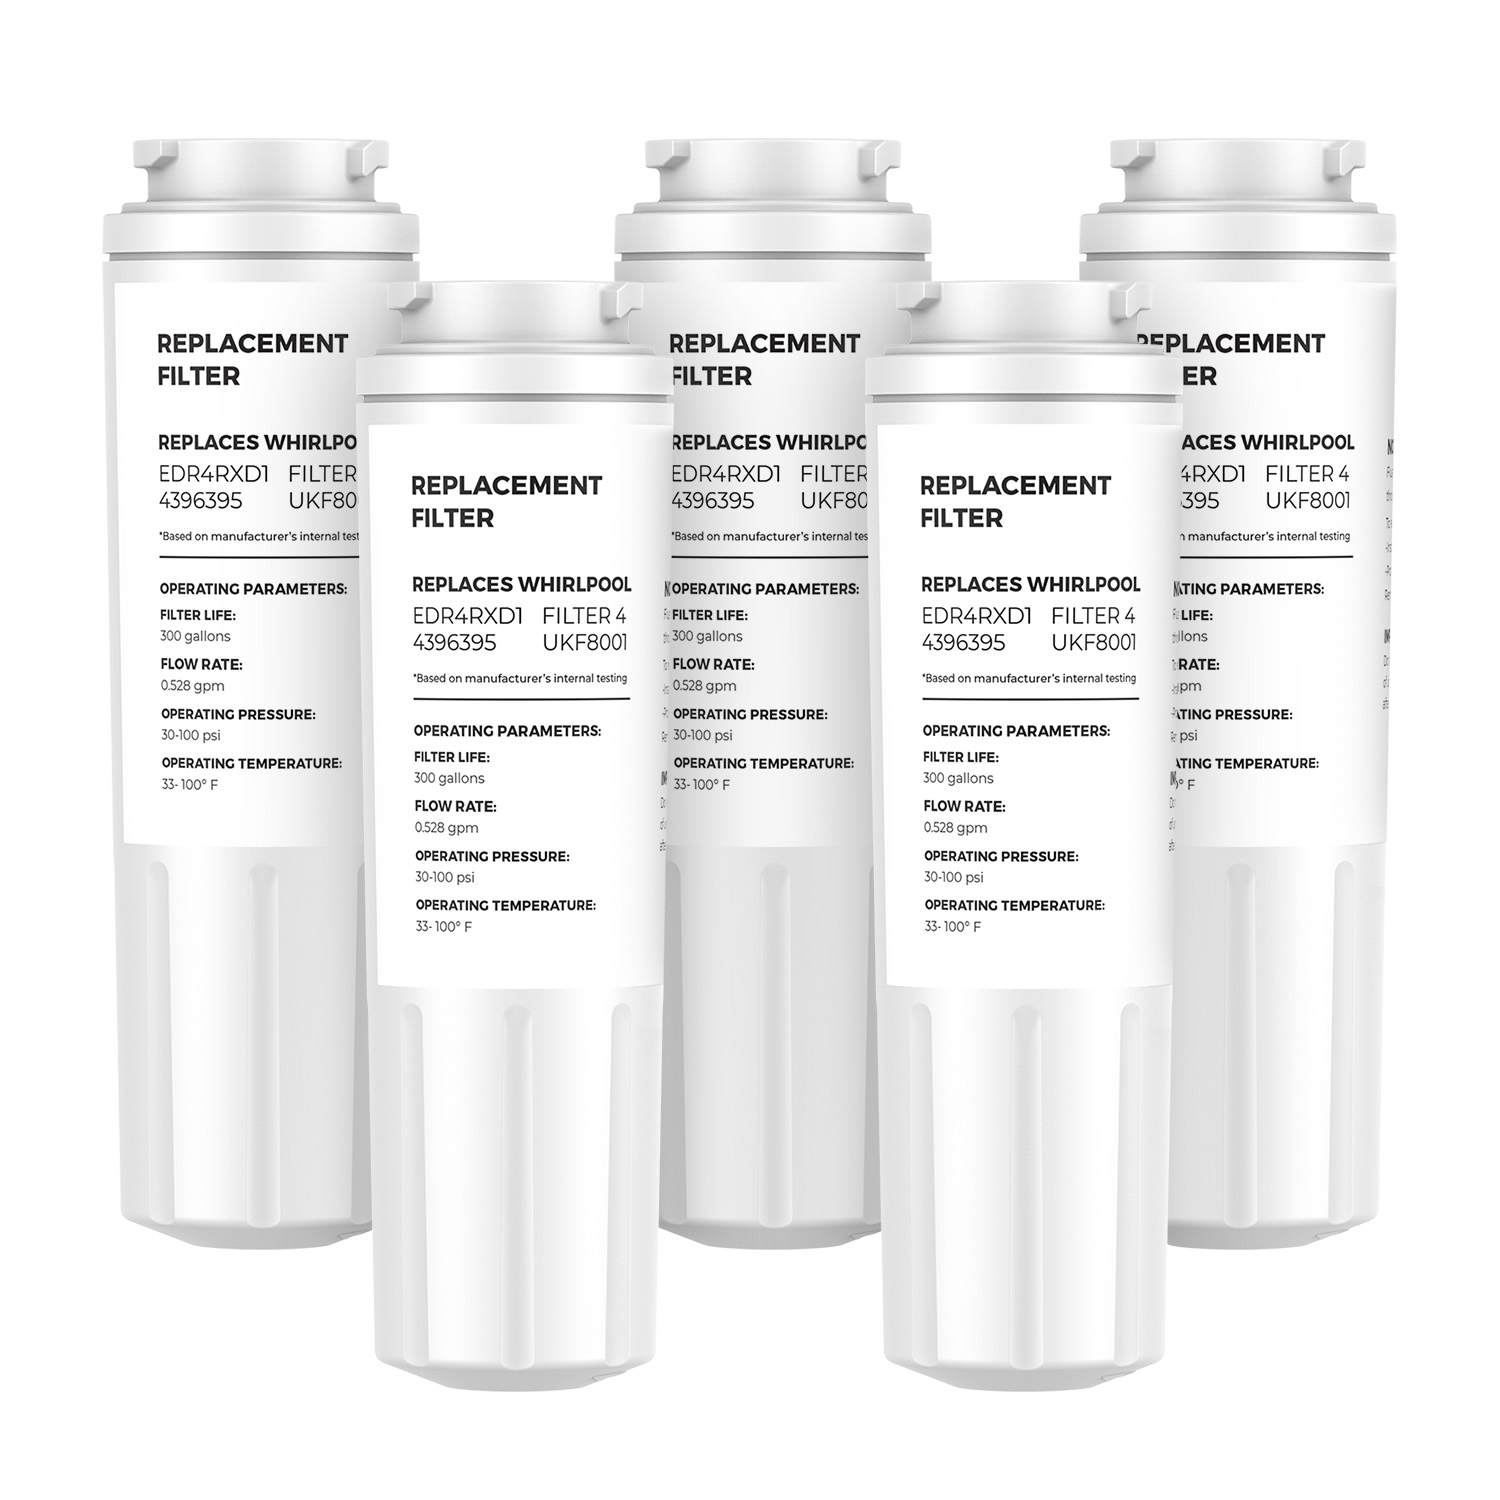 Replacement for EDR4RXD1, UKF8001, 4396395, Filter 4 Water Filter 5 Packs Made by sellfilter